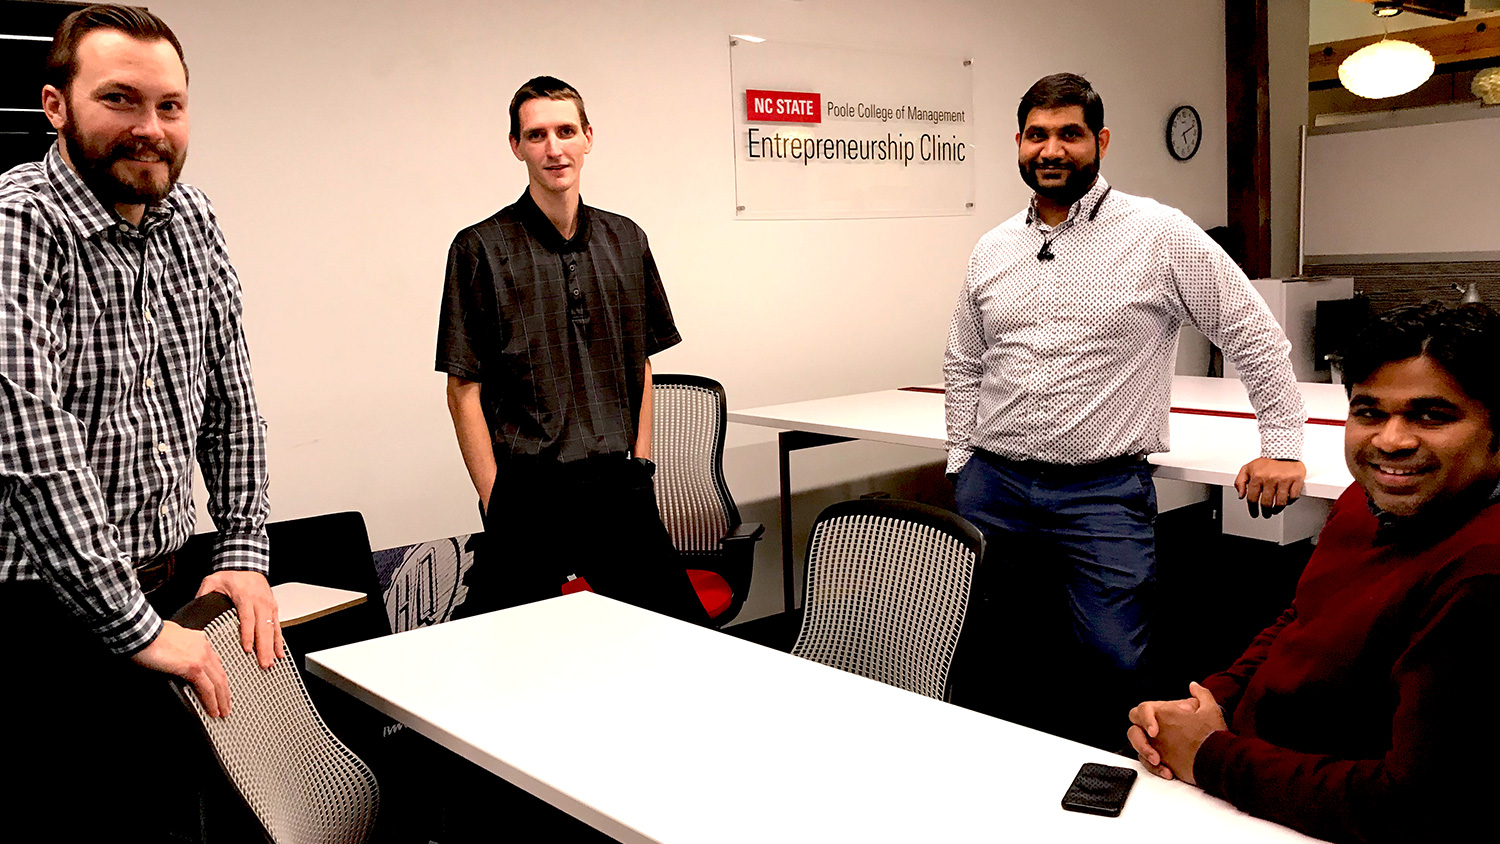 MBA team members meeting at the NC State Entrepreneurship Clinic, left to right: Cody Shipman, Taylor Utecht, Shyam Ram, and Krupa Stephen Gadde